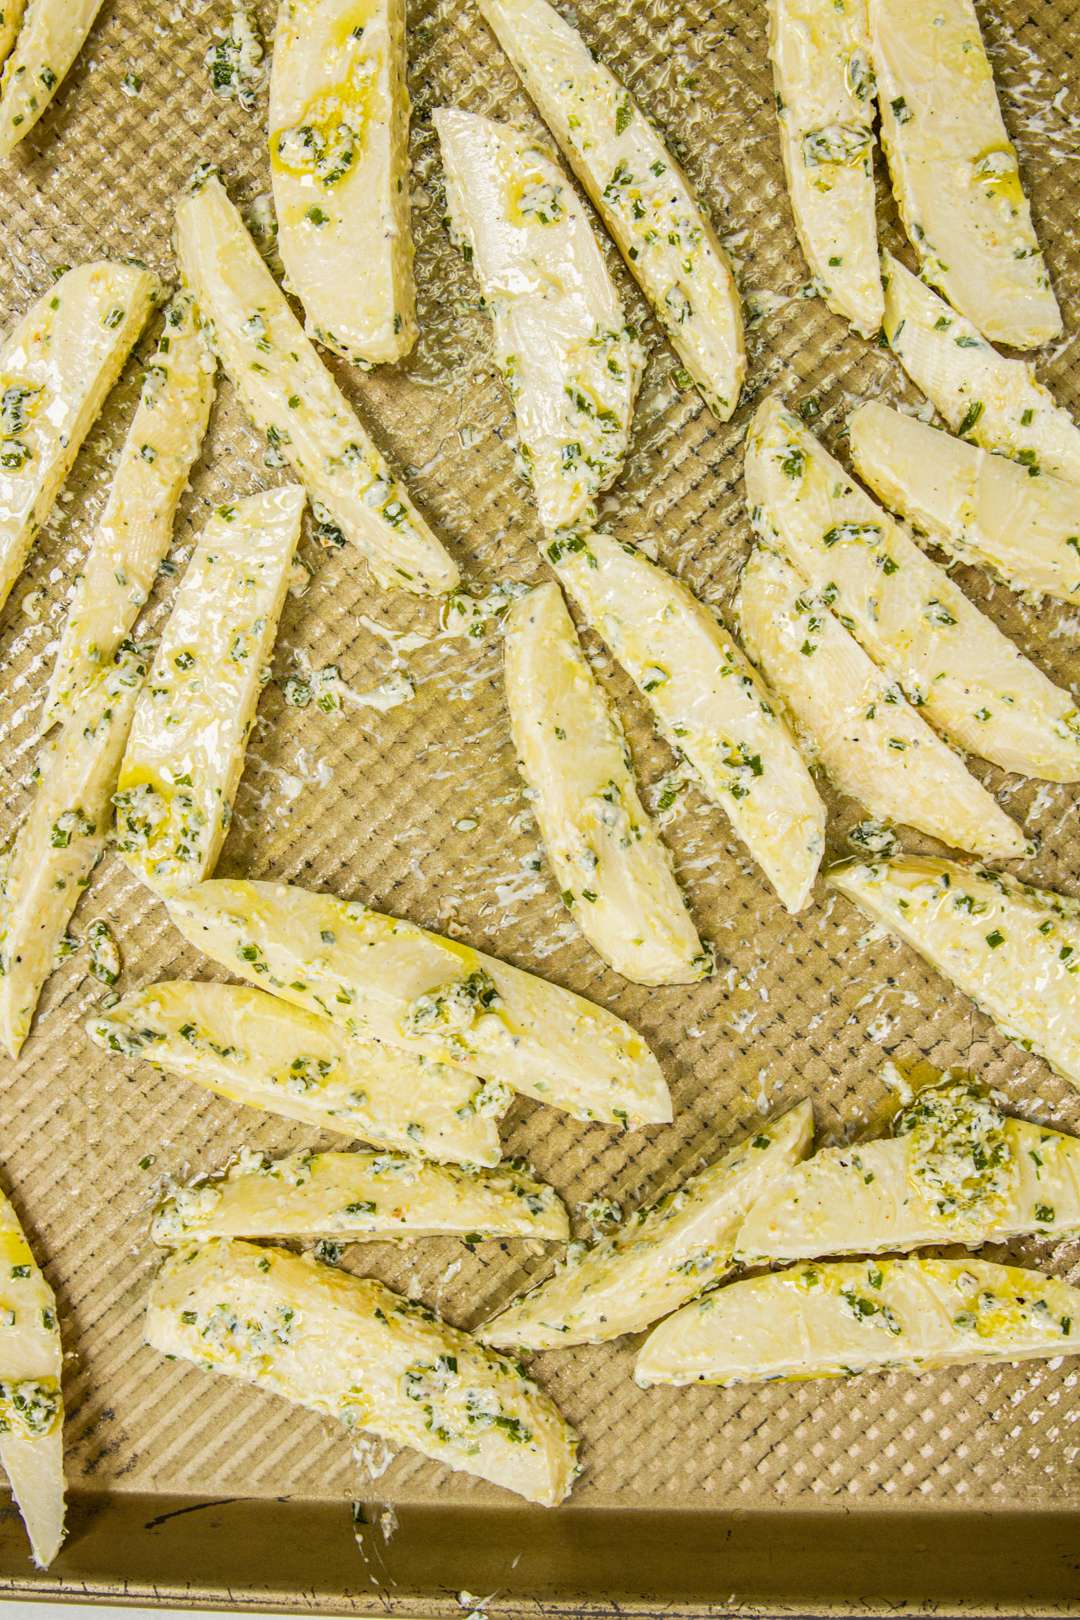 Sour cream and chive fries on baking sheet